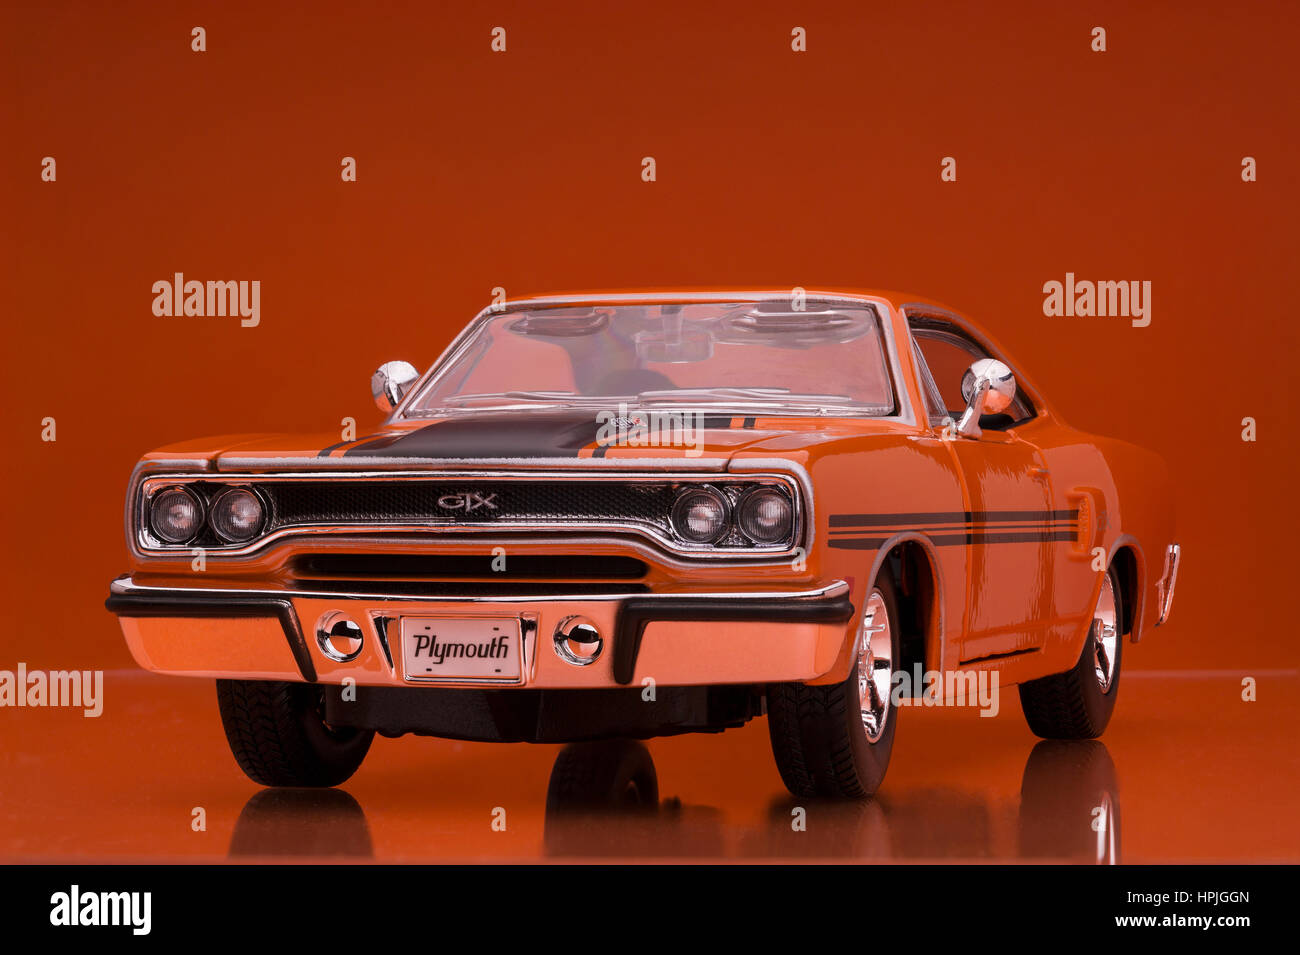 1970 Plymouth GTX Welly die cast model car Stock Photo